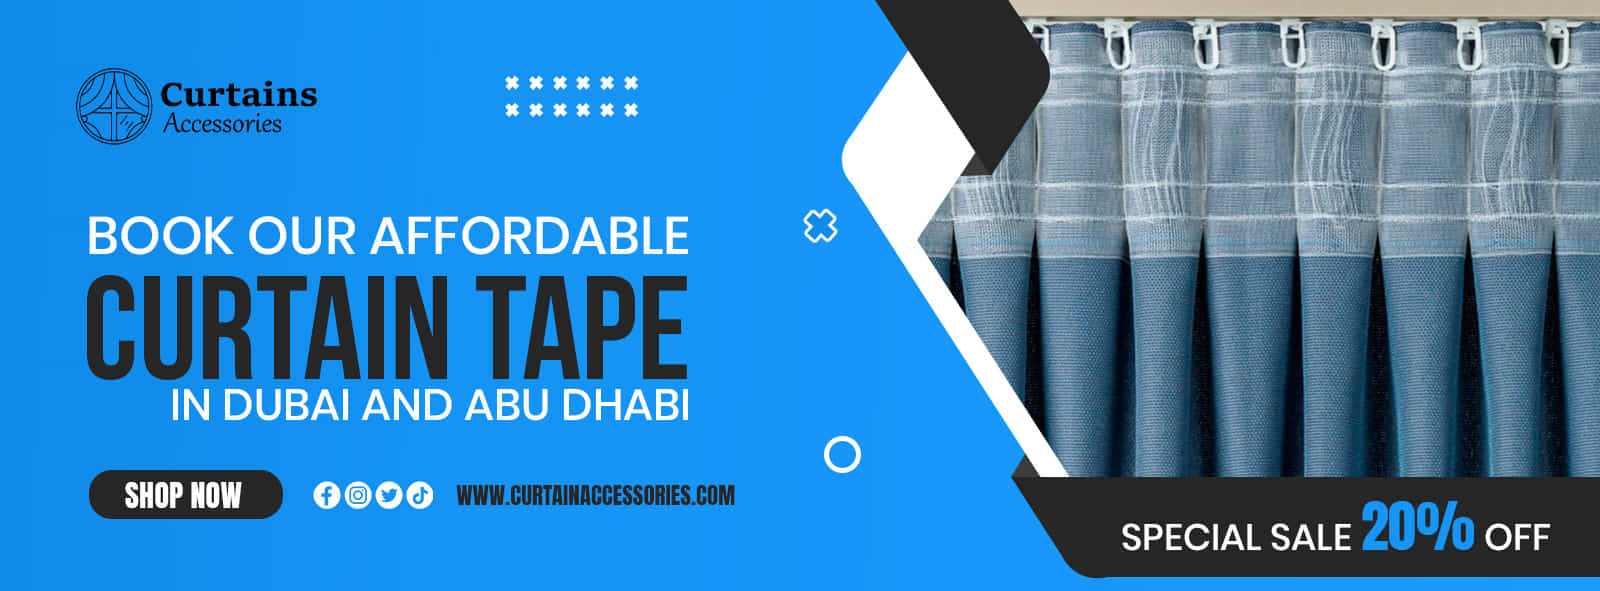 curtain-tape banner